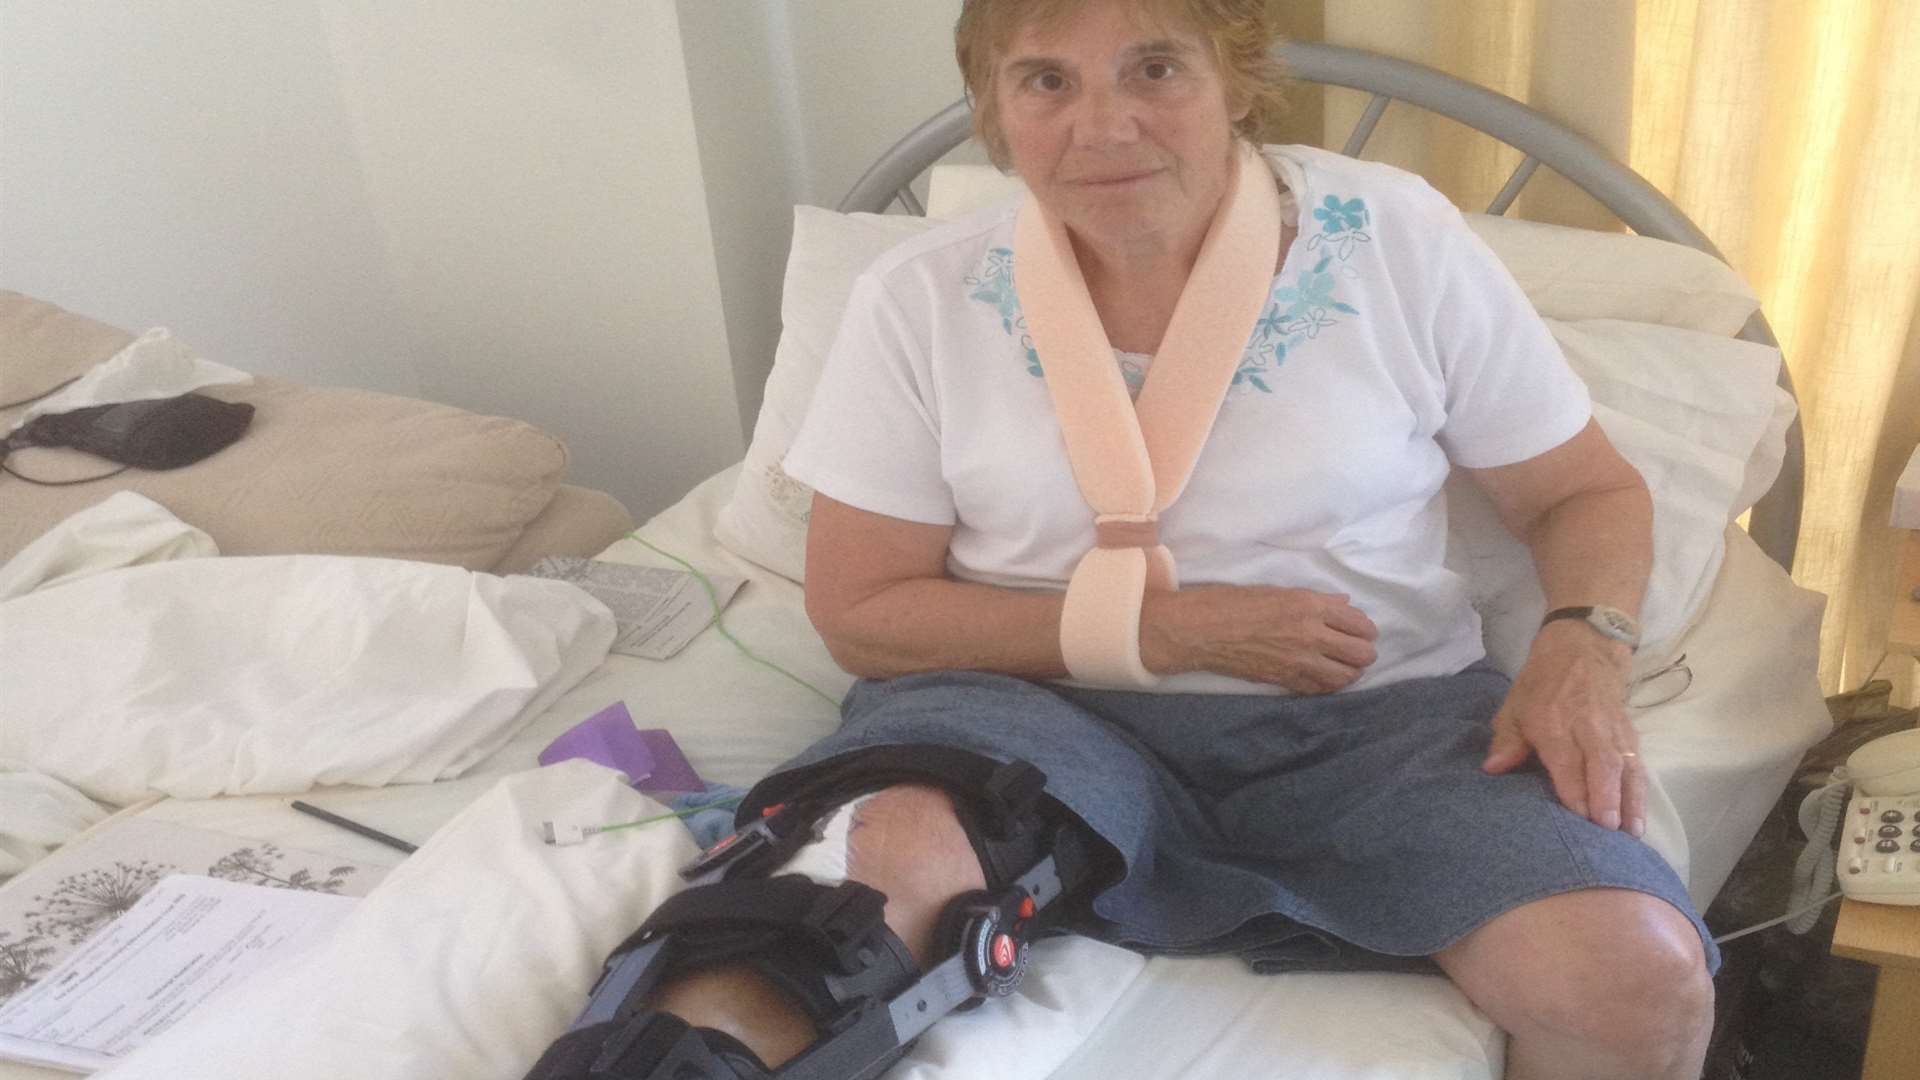 Cyclist Dawn Shoard broke her tibia and elbow in the accident